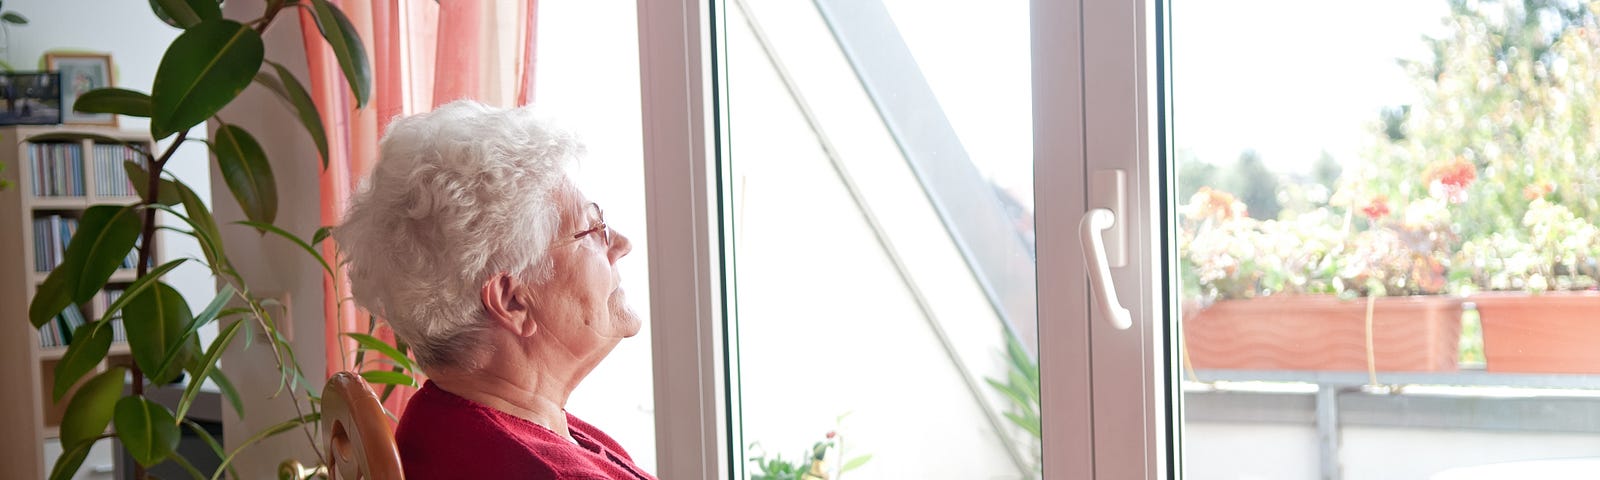 An elderly lady is sitting on a chair in her home and staring out her window.